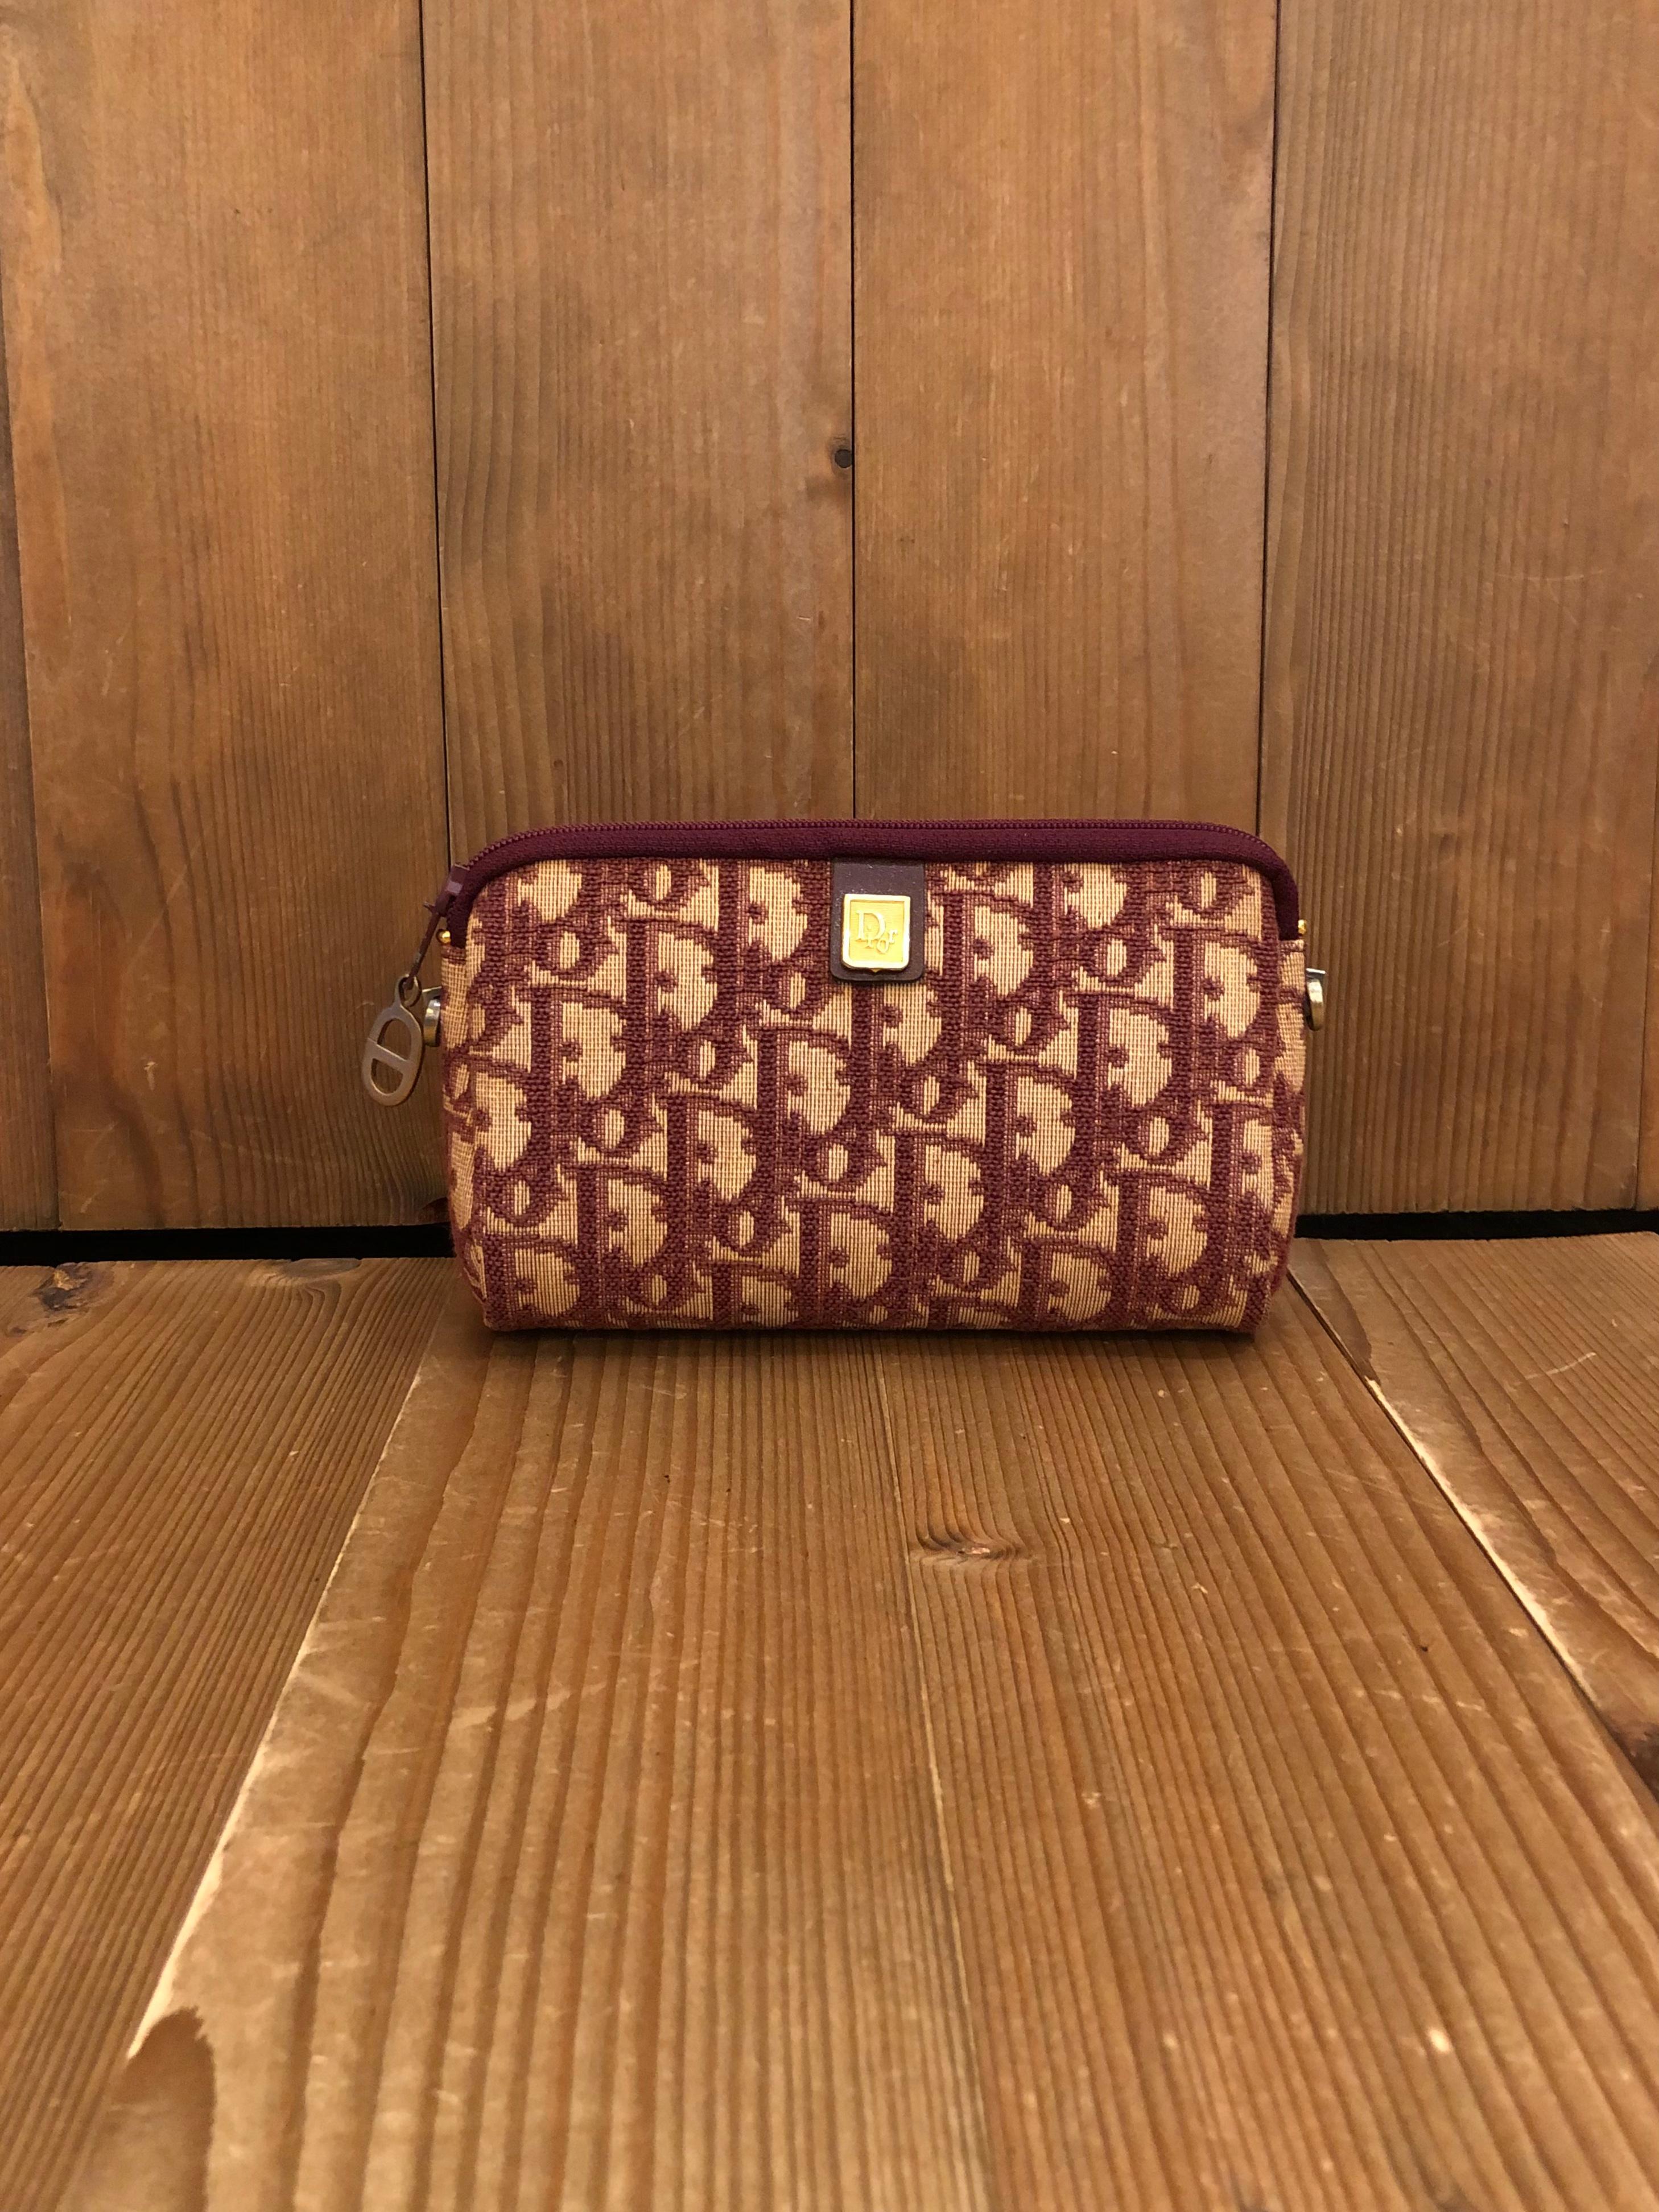 This 1970s Vintage CHRISTIAN DIOR mini pouch is crafted of Dior signature Trotter jacquard in burgundy. Top zipper closure opens to a coated interior in burgundy. Made in France. Third party hardware added on the sides to secure a gold toned chain.